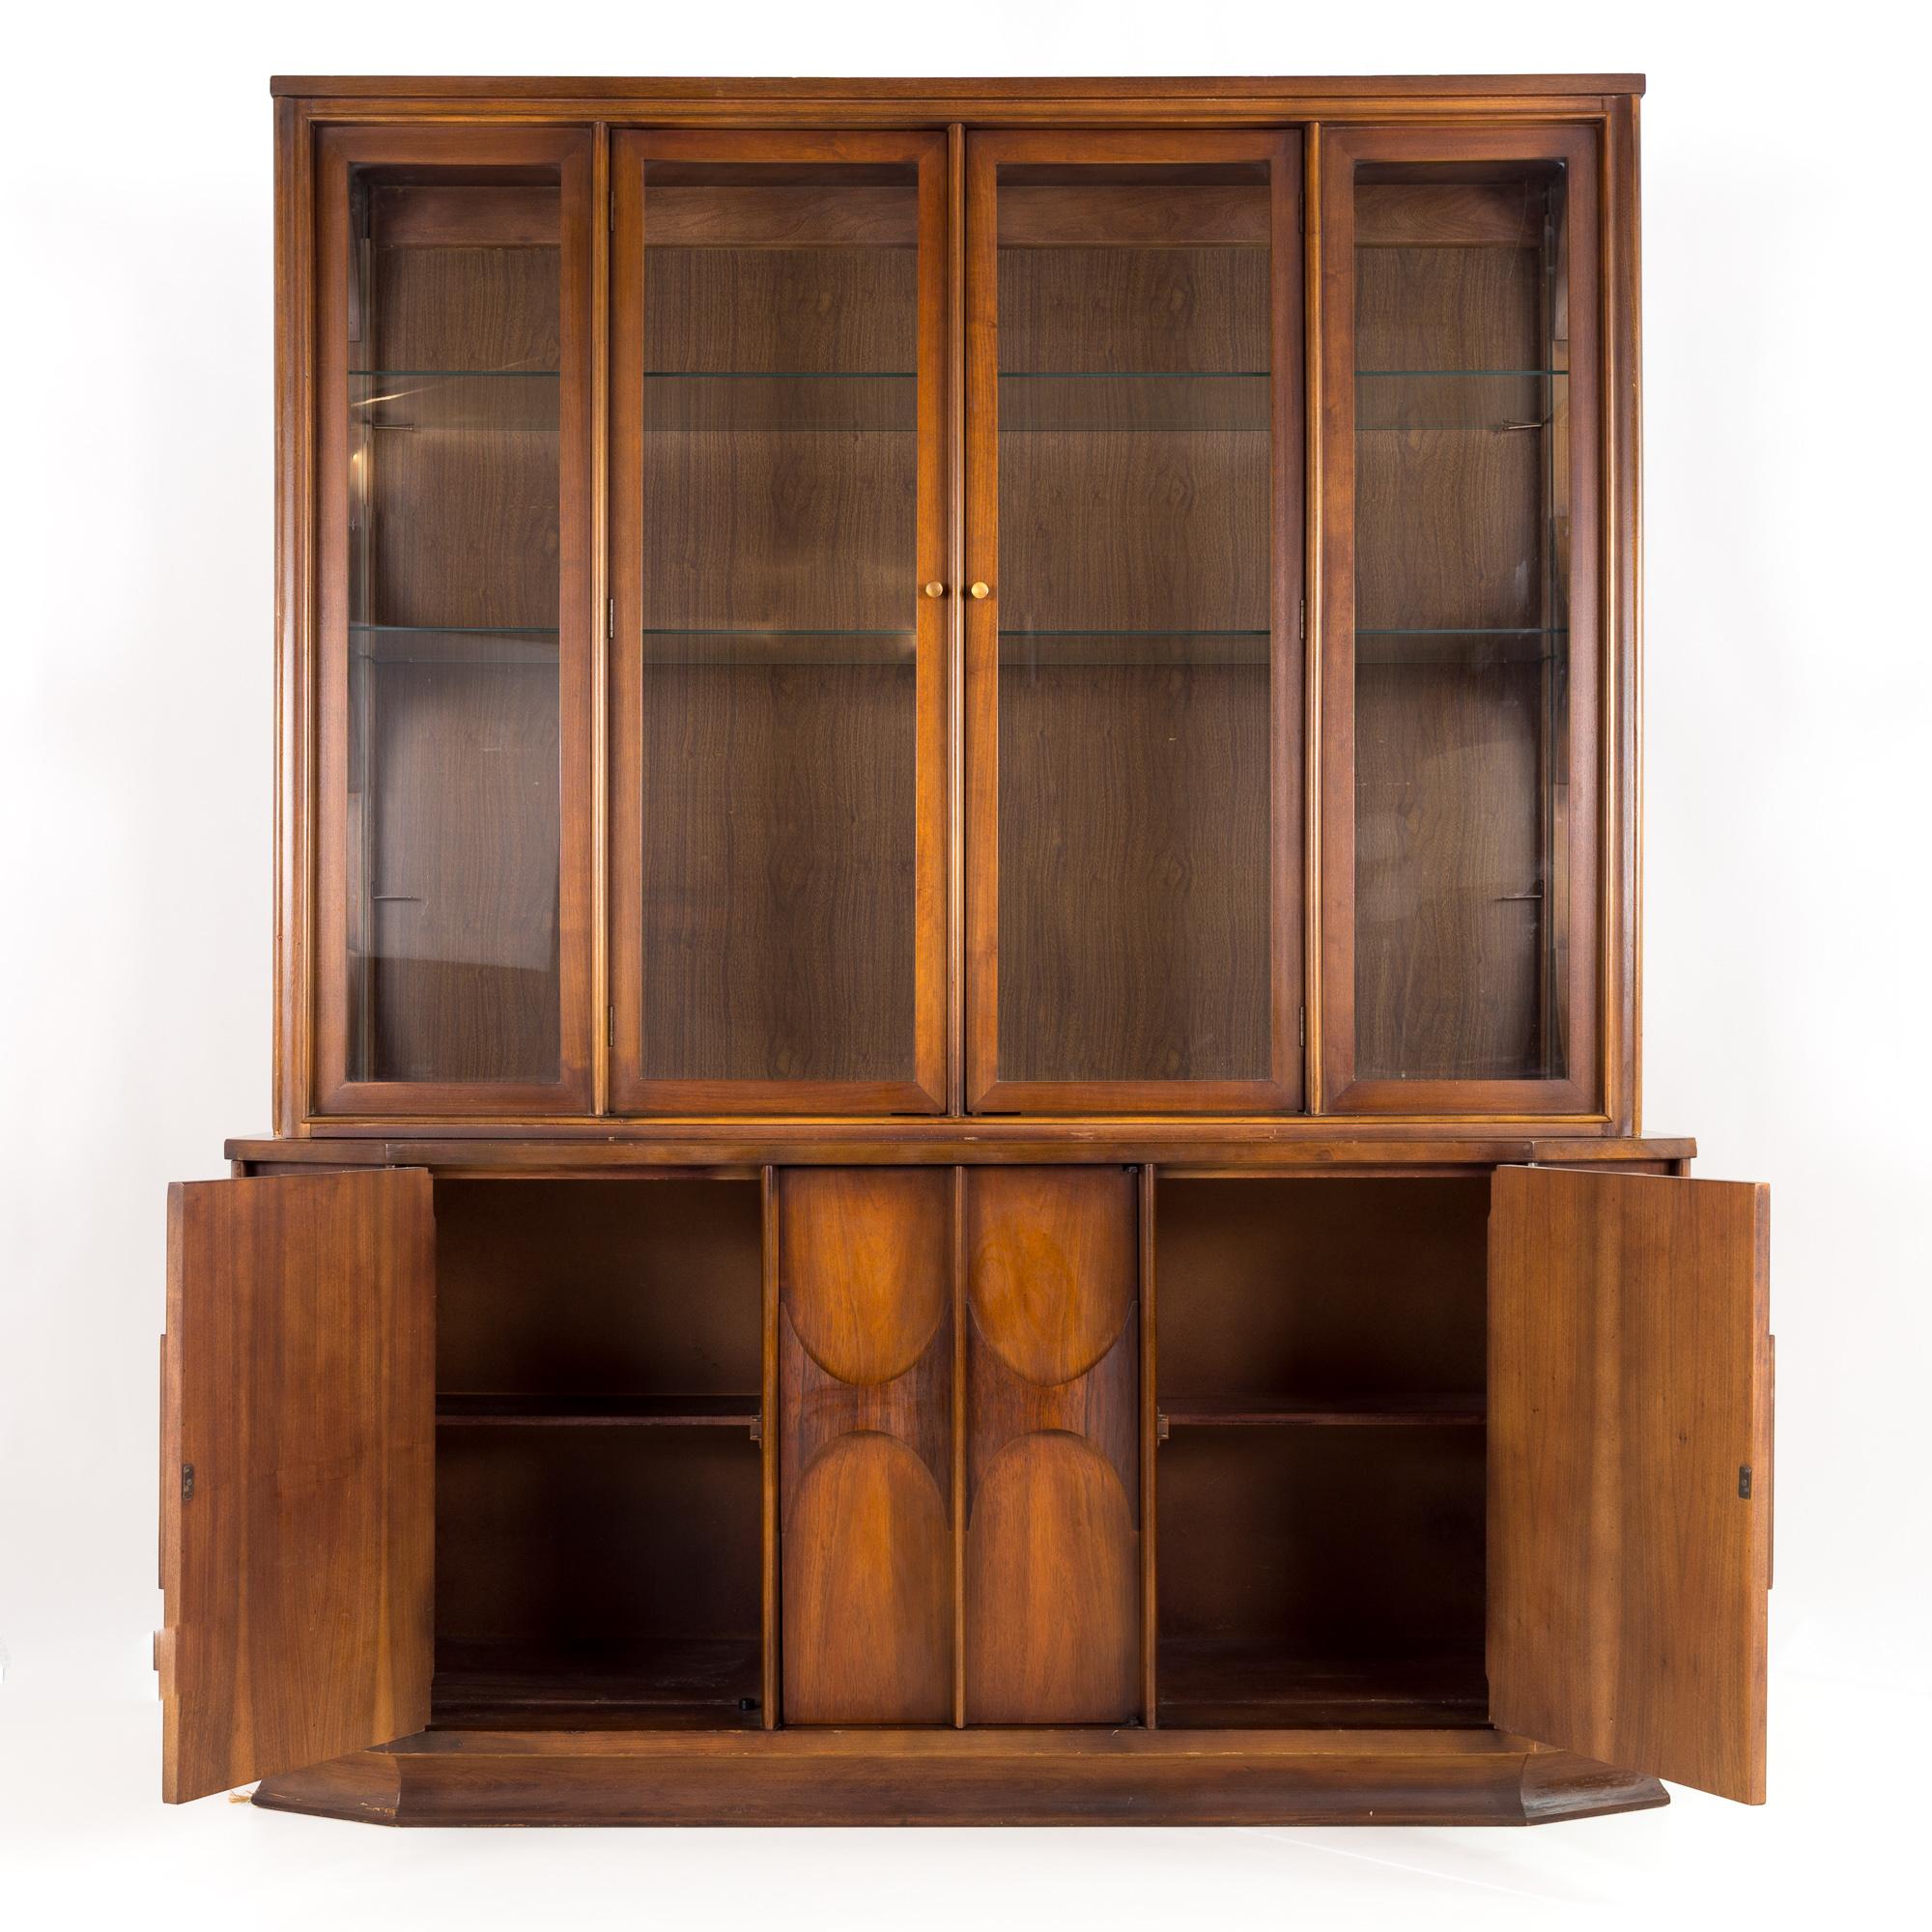 Kent Coffey Perspecta mid century walnut and rosewood China cabinet sideboard buffet and hutch

The base unit is 66 long x 20 deep x 30 high. The hutch is 62 long x 16 deep x 48 high for a total combined height of 78 inches when put